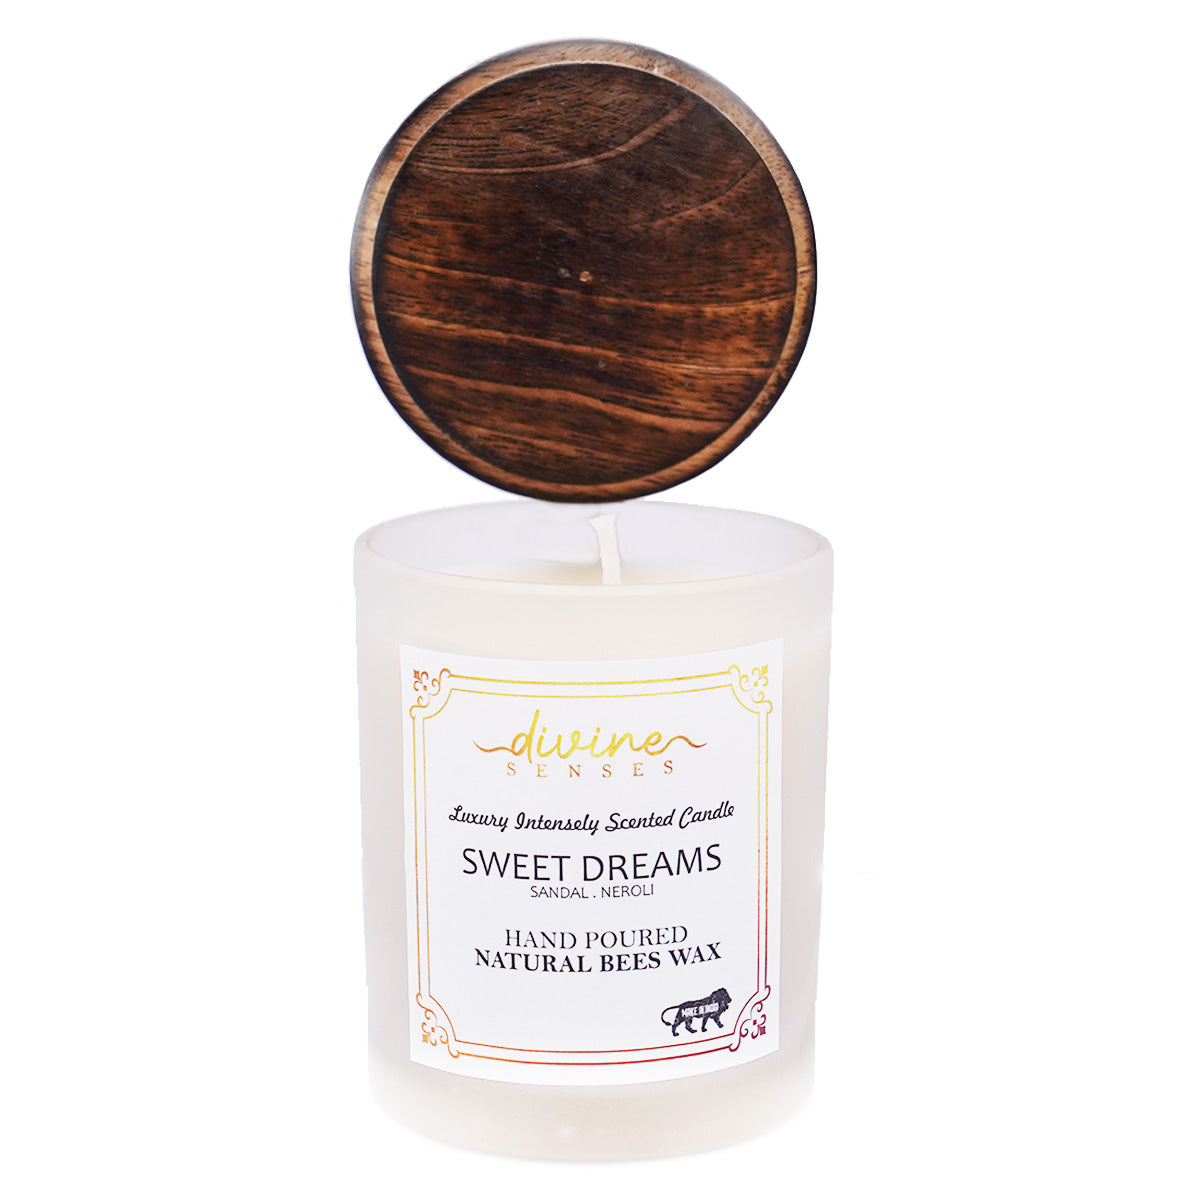 Beeswax Scented Candle with Glass Jar - Sandalwood & Neroli